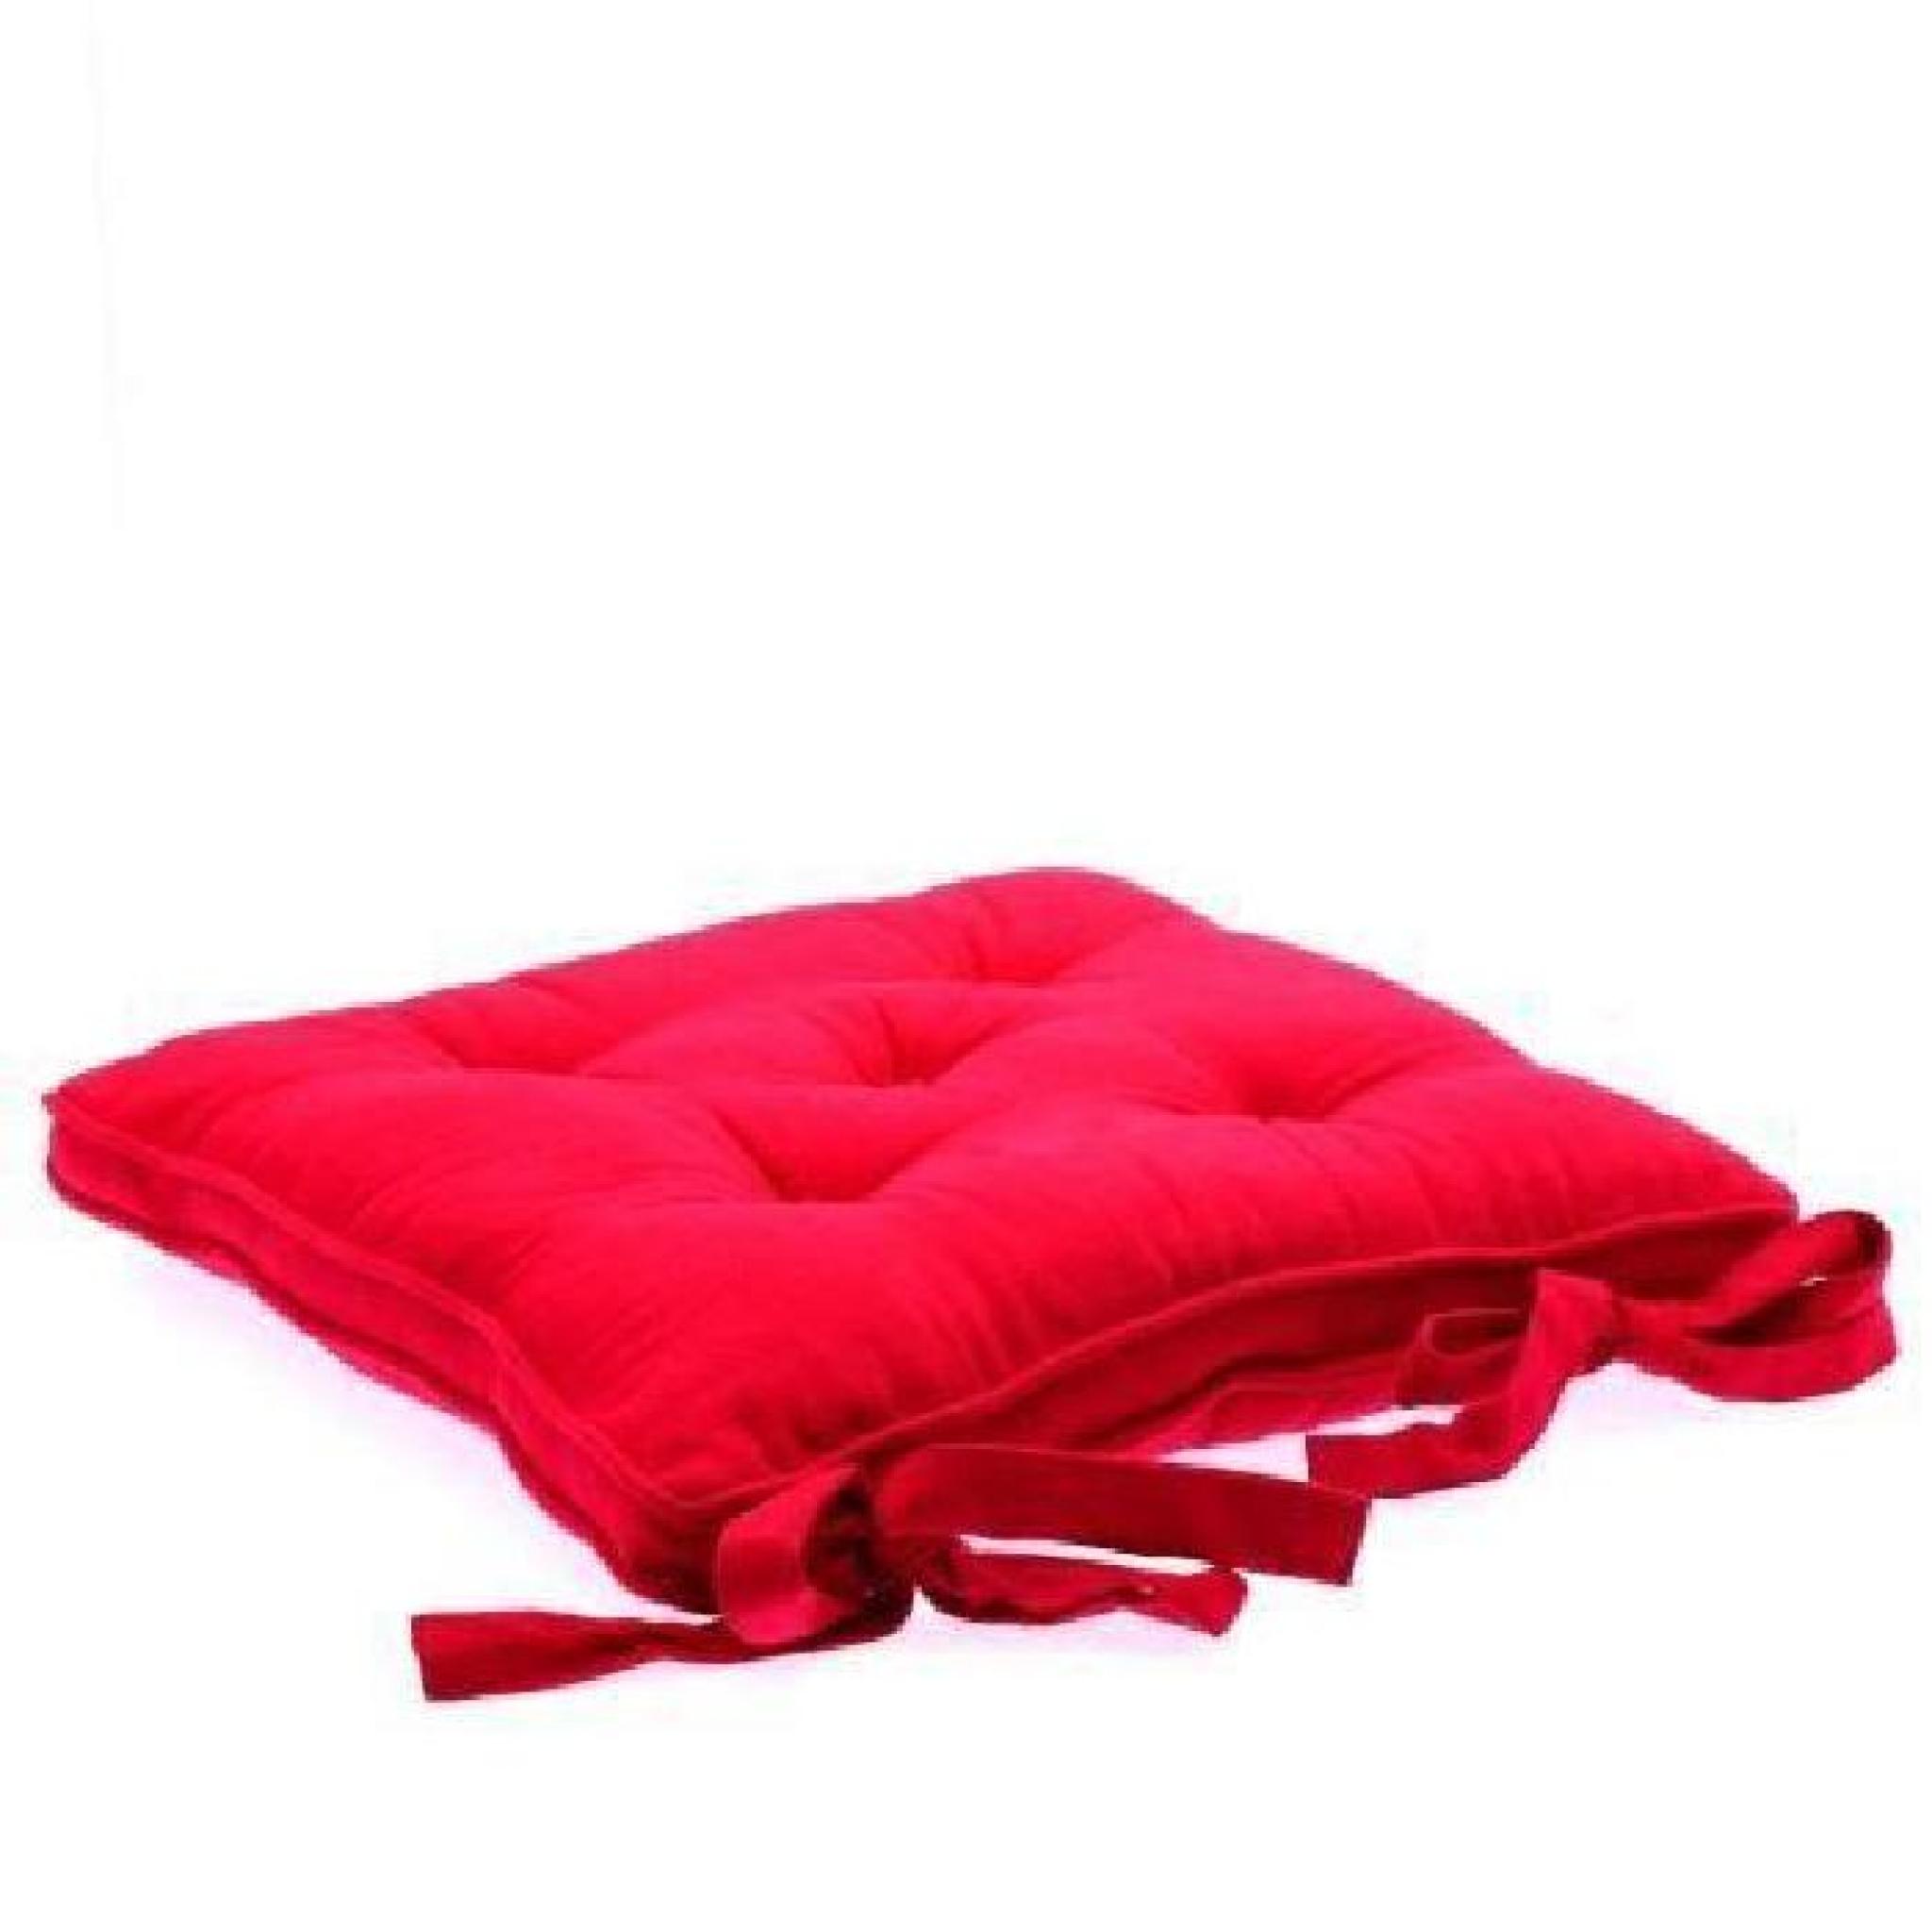 GALETTE CHAISE 5 BOUTONS FRAMBOISE pas cher